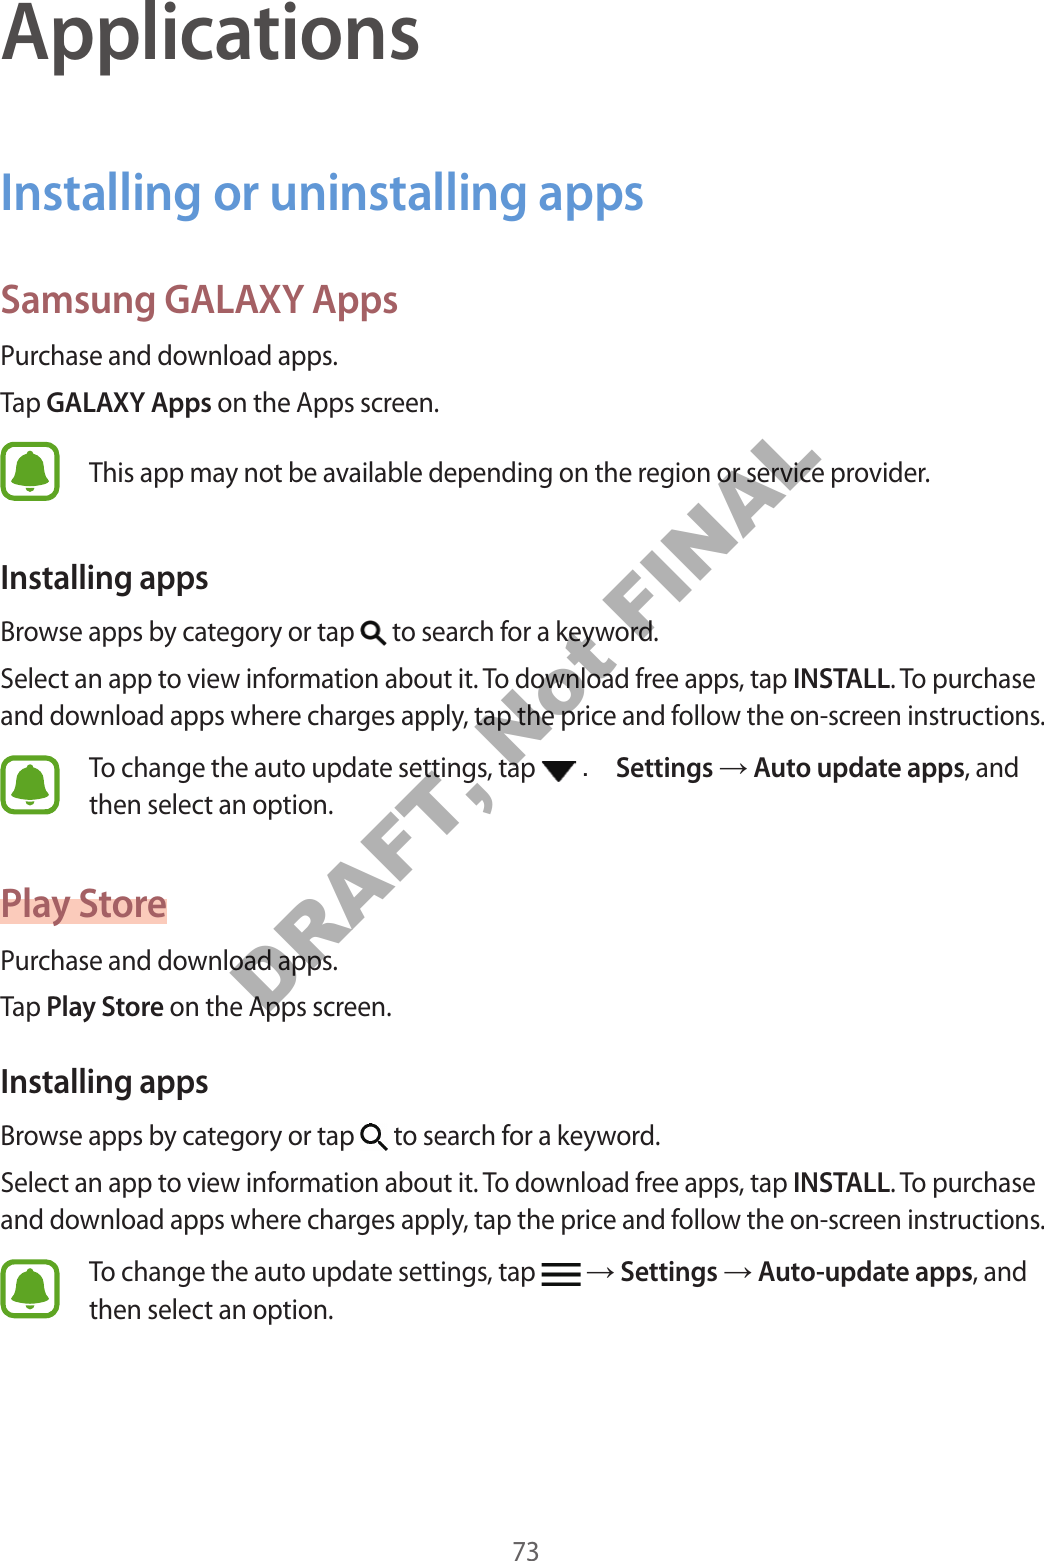 73ApplicationsInstalling or uninstalling appsSamsung GALAXY AppsPur chase and do wnload apps .Tap GALAXY Apps on the Apps screen.This app may not be a vailable depending on the r eg ion or service provider.Installing appsBrow se apps b y cat egory or tap   to search for a keywor d .Select an app to view inf ormation about it. To download free apps, tap INSTALL. To purchase and download apps where char ges apply, tap the price and f ollo w the on-scr een instructions.To change the auto update settings , tap   . Settings  Aut o updat e apps, and then select an option.Pla y St orePur chase and do wnload apps .Tap Play St or e on the Apps screen.Installing appsBrow se apps b y cat egory or tap   to search for a keywor d .Select an app to view inf ormation about it. To download free apps, tap INSTALL. To purchase and download apps where char ges apply, tap the price and f ollo w the on-scr een instructions.To change the auto update settings , tap    Settings  Aut o-update apps, and then select an option.DRAFT, Not FINAL